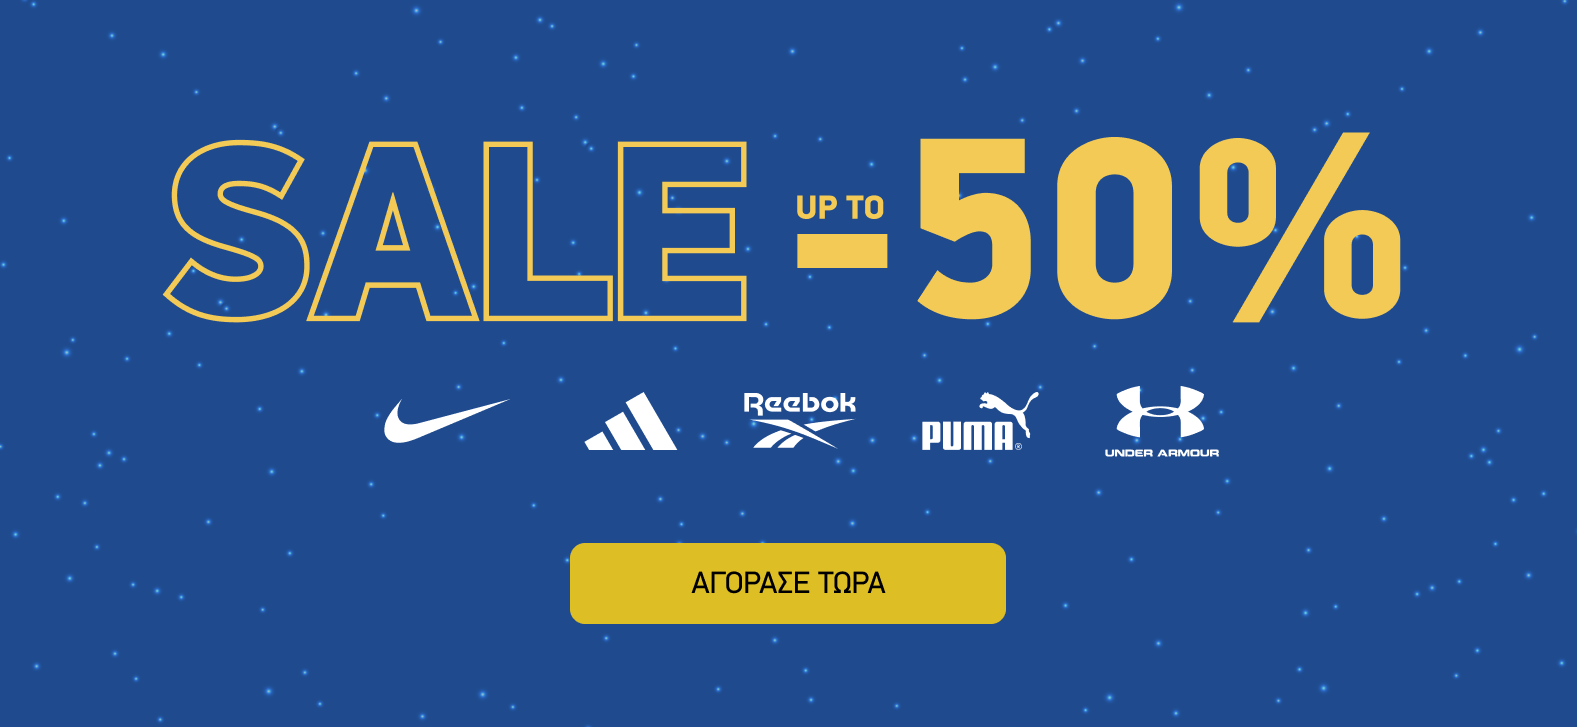 up to 50% off